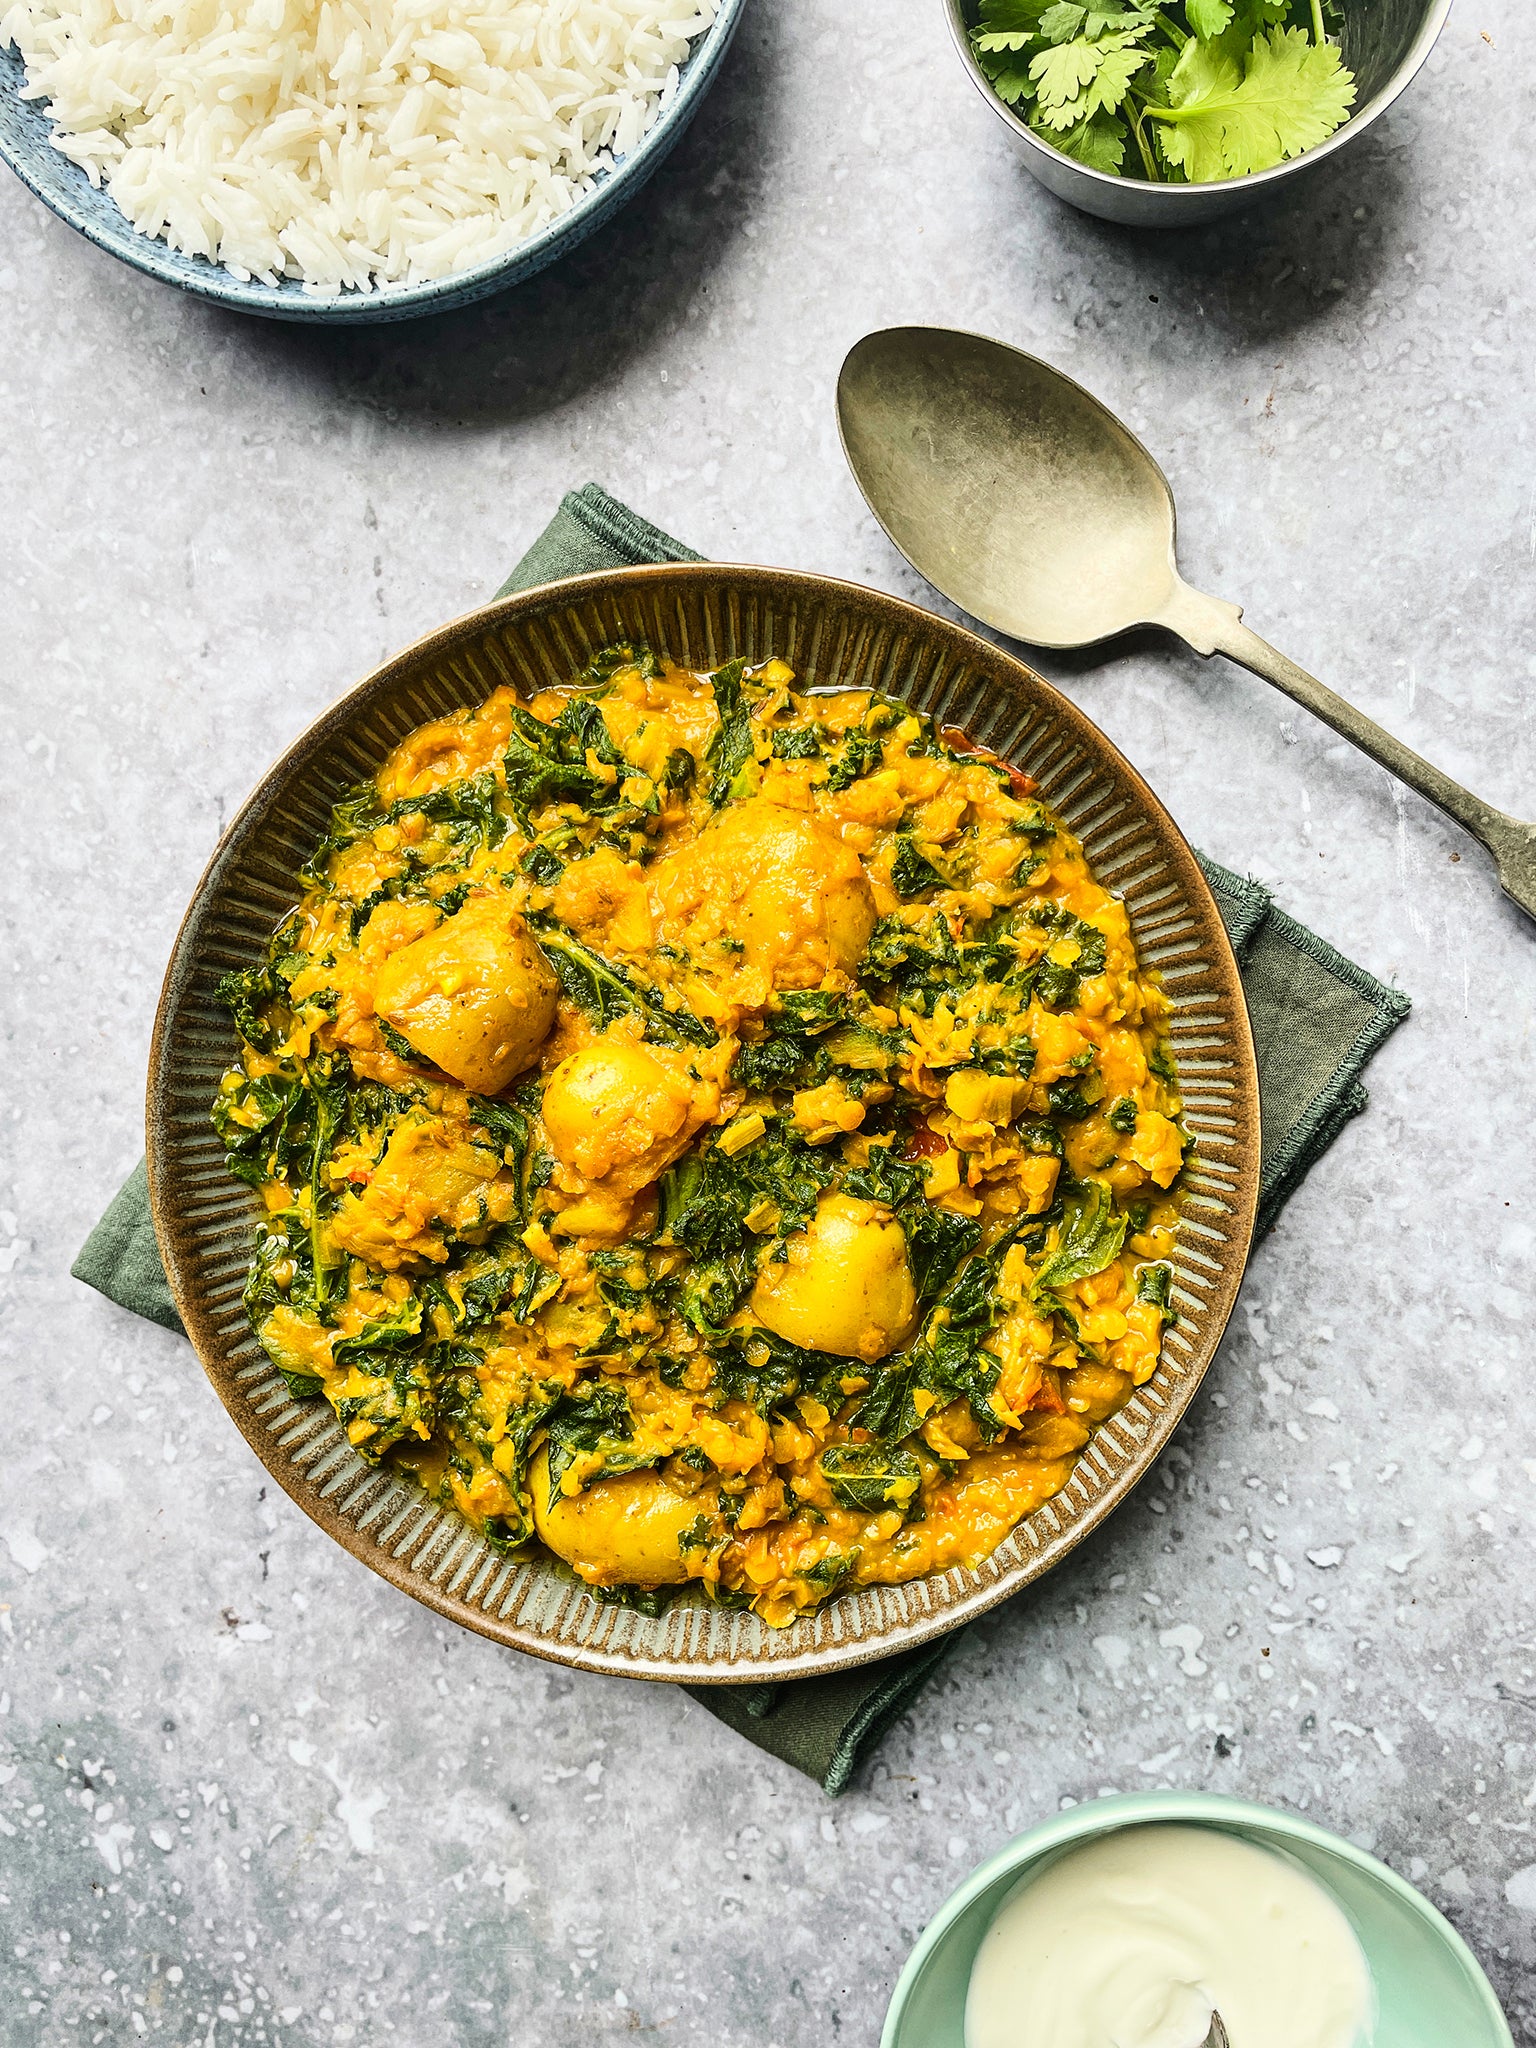 The creamy potato and kale curry is perfect for batch cooking as it can be made ahead and frozen